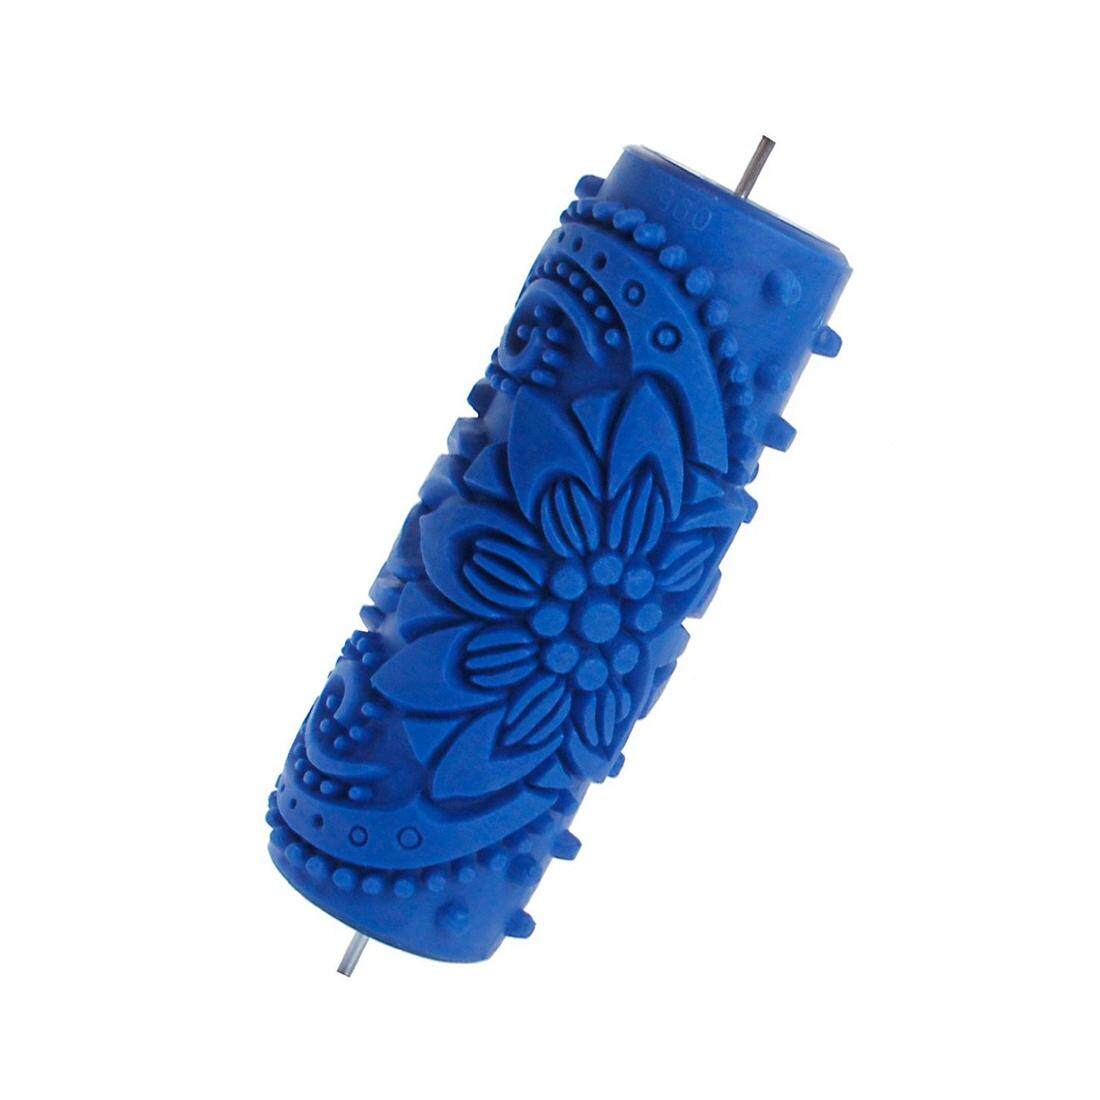 15cm Flower Knurled Relief Paint Roller Wallpaper Tool for DIY Wall Shaping